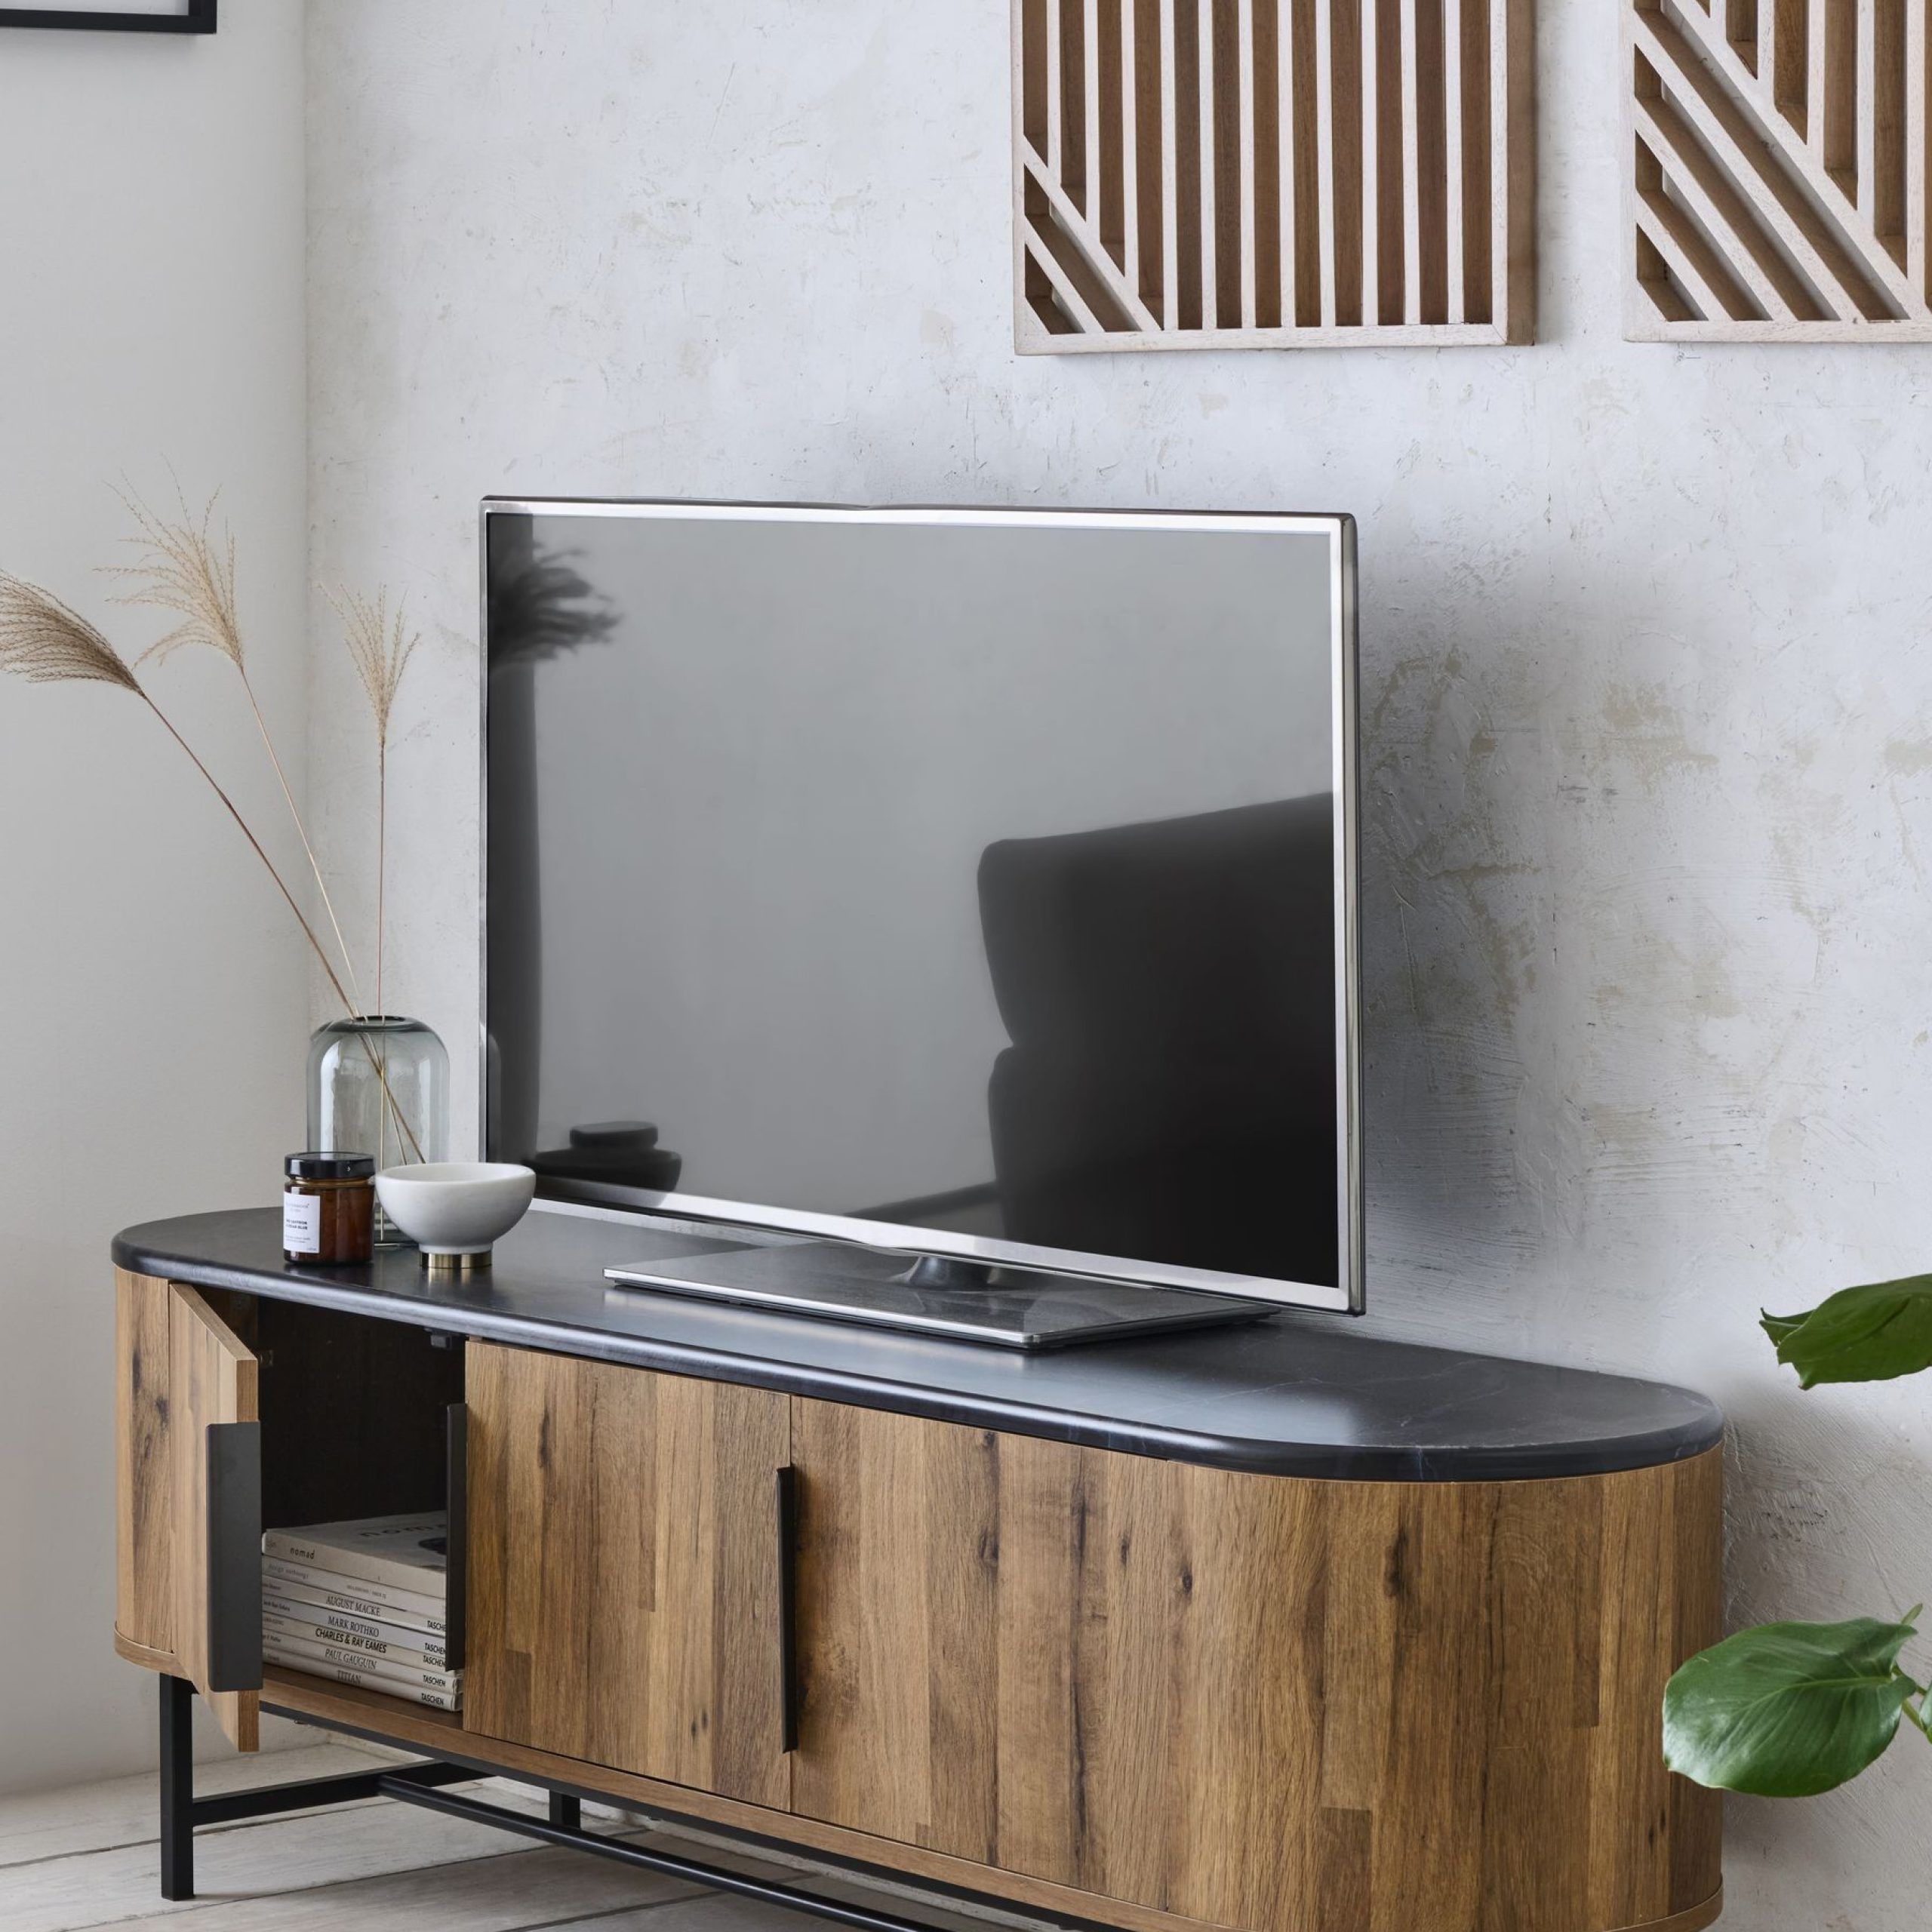 Buy Dark Bronx Oak And Black Marble Effect Curved Wide Wide Tv Stand Regarding Black Marble Tv Stands (View 8 of 20)